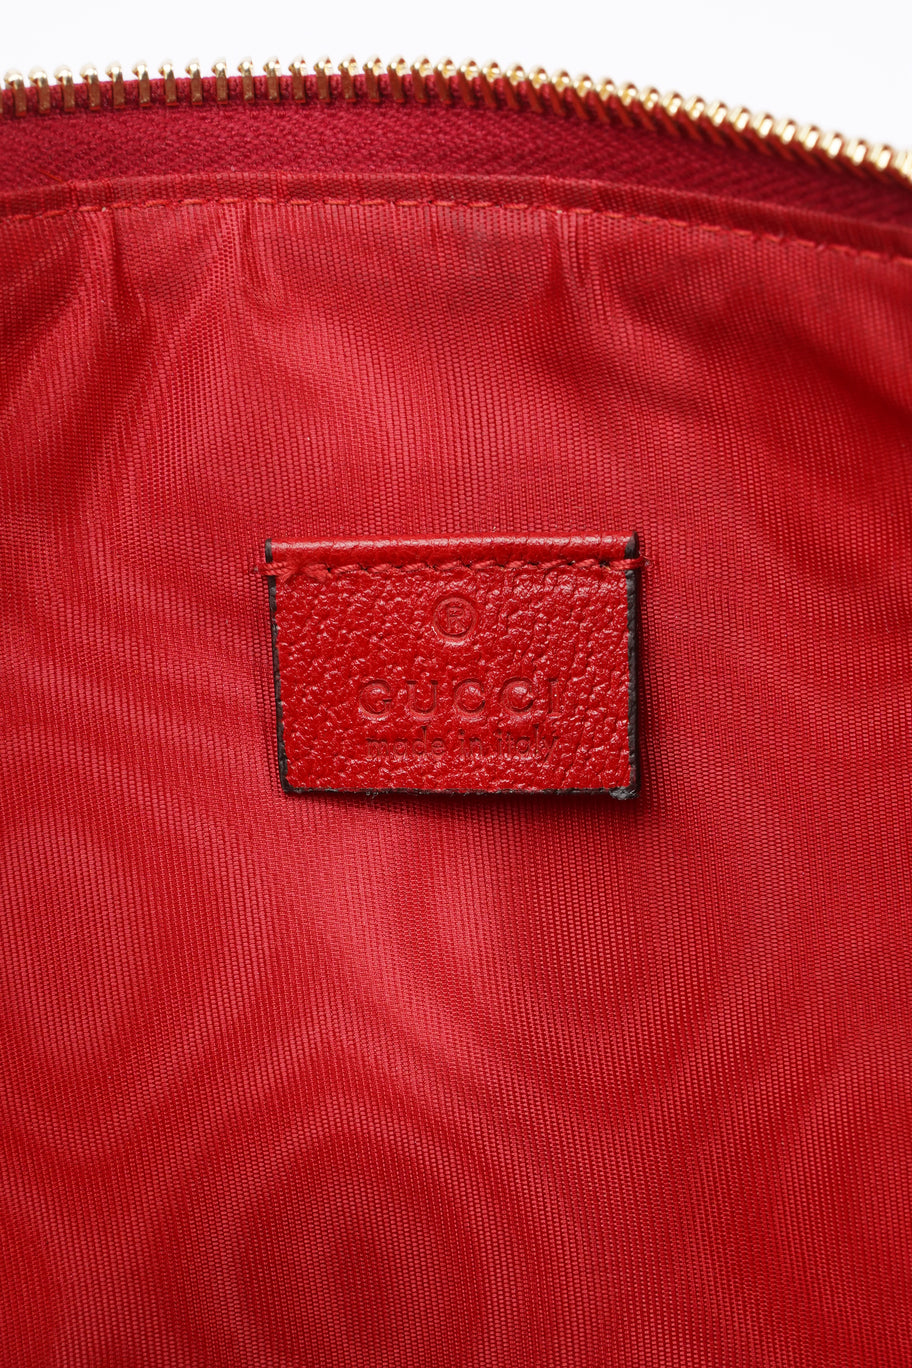 Clutch Red / White / Blue Canvas Image 10